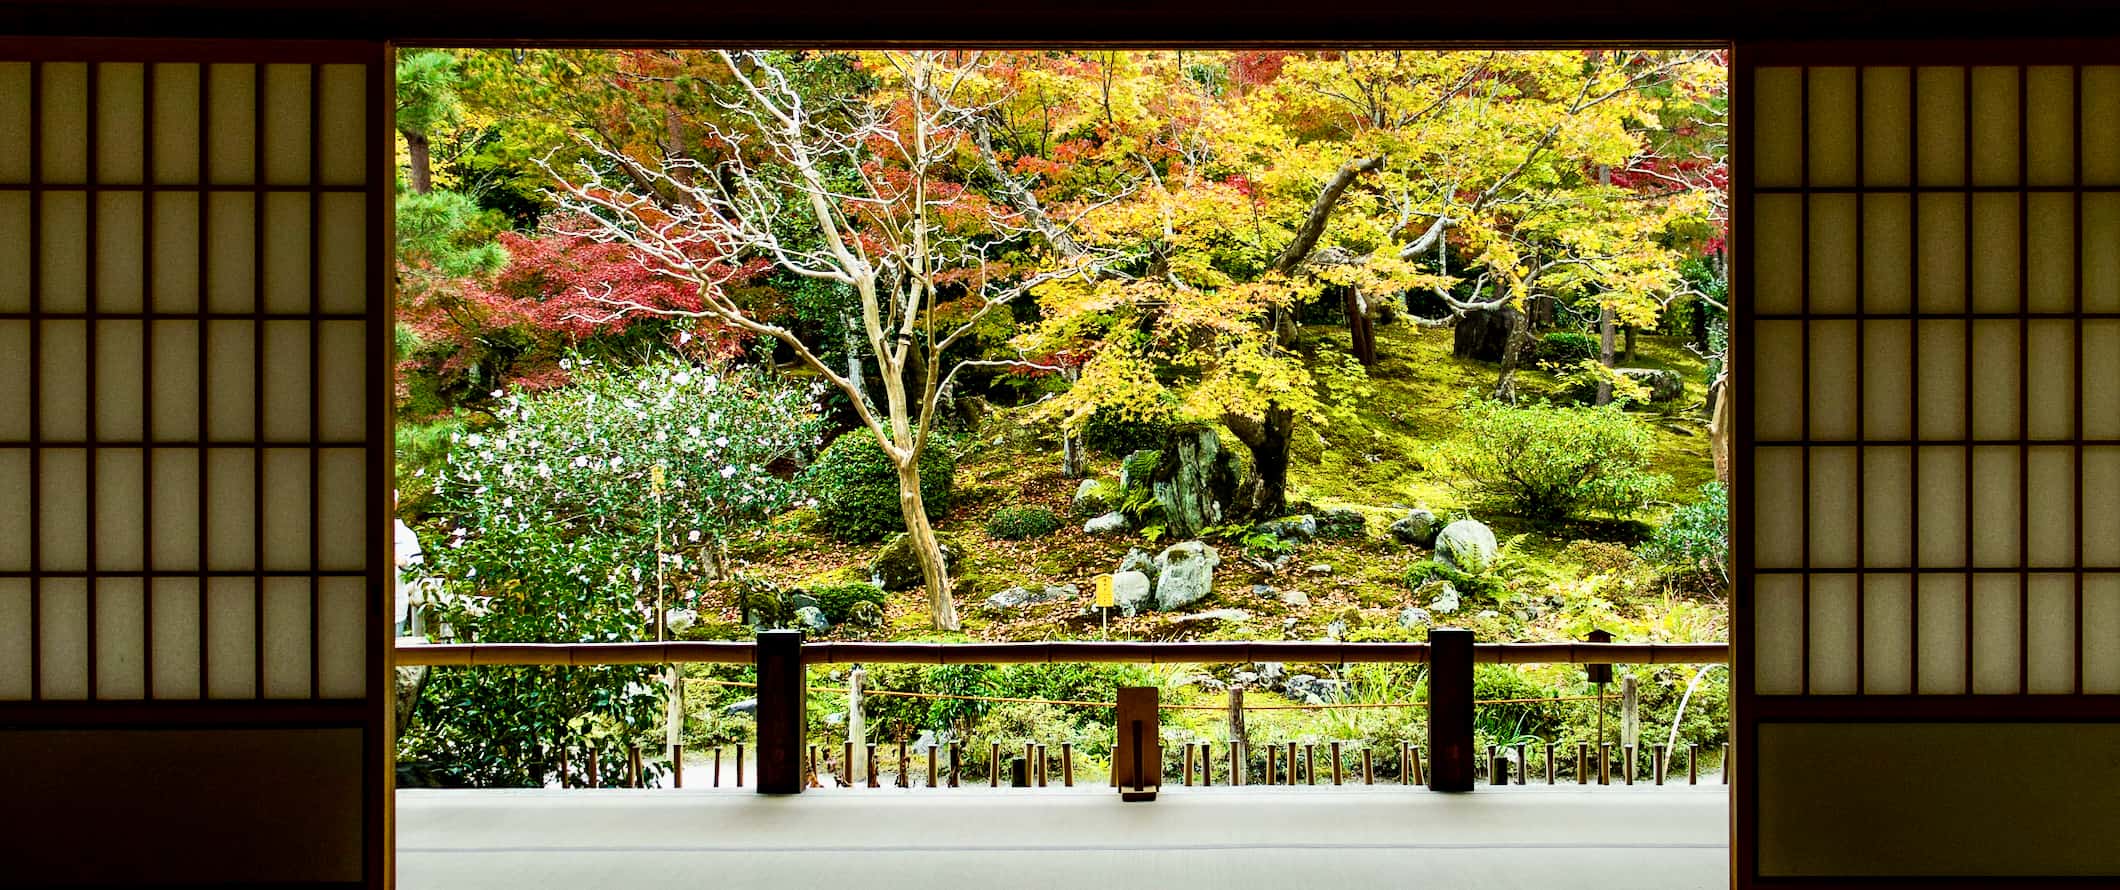 The scenic view from one of the many relaxing Buddhist temples in Kyoto, Japan